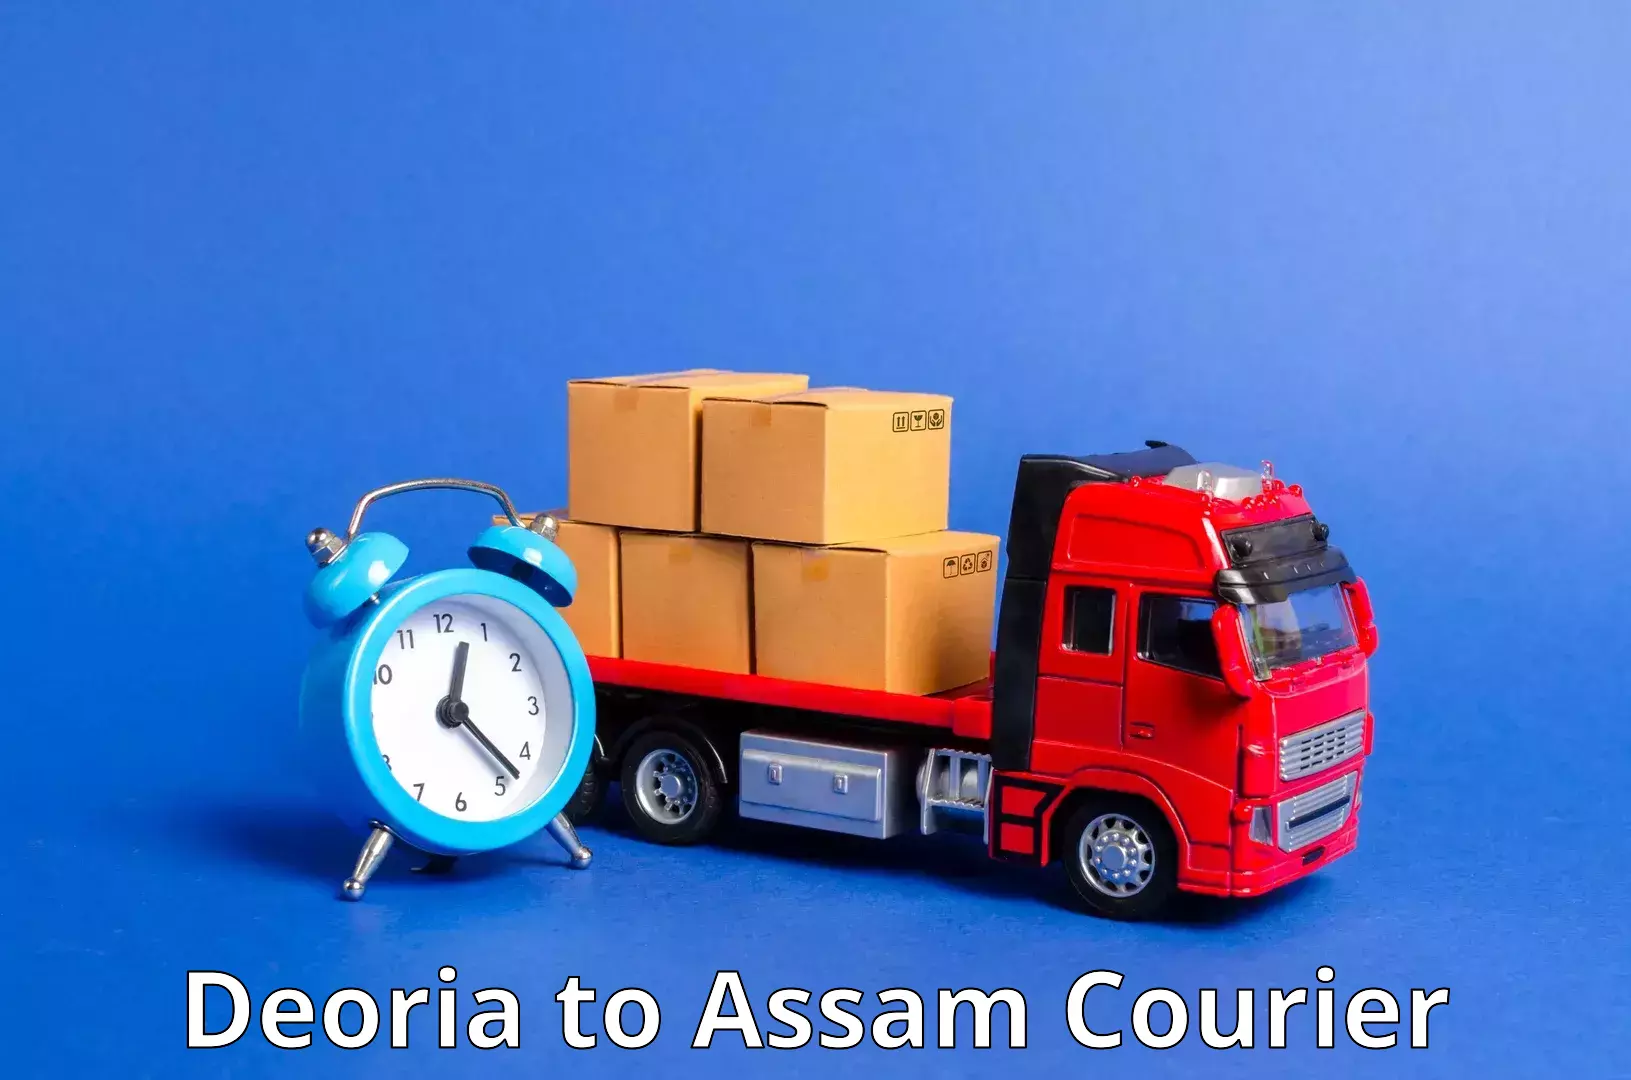 Reliable delivery network Deoria to Assam